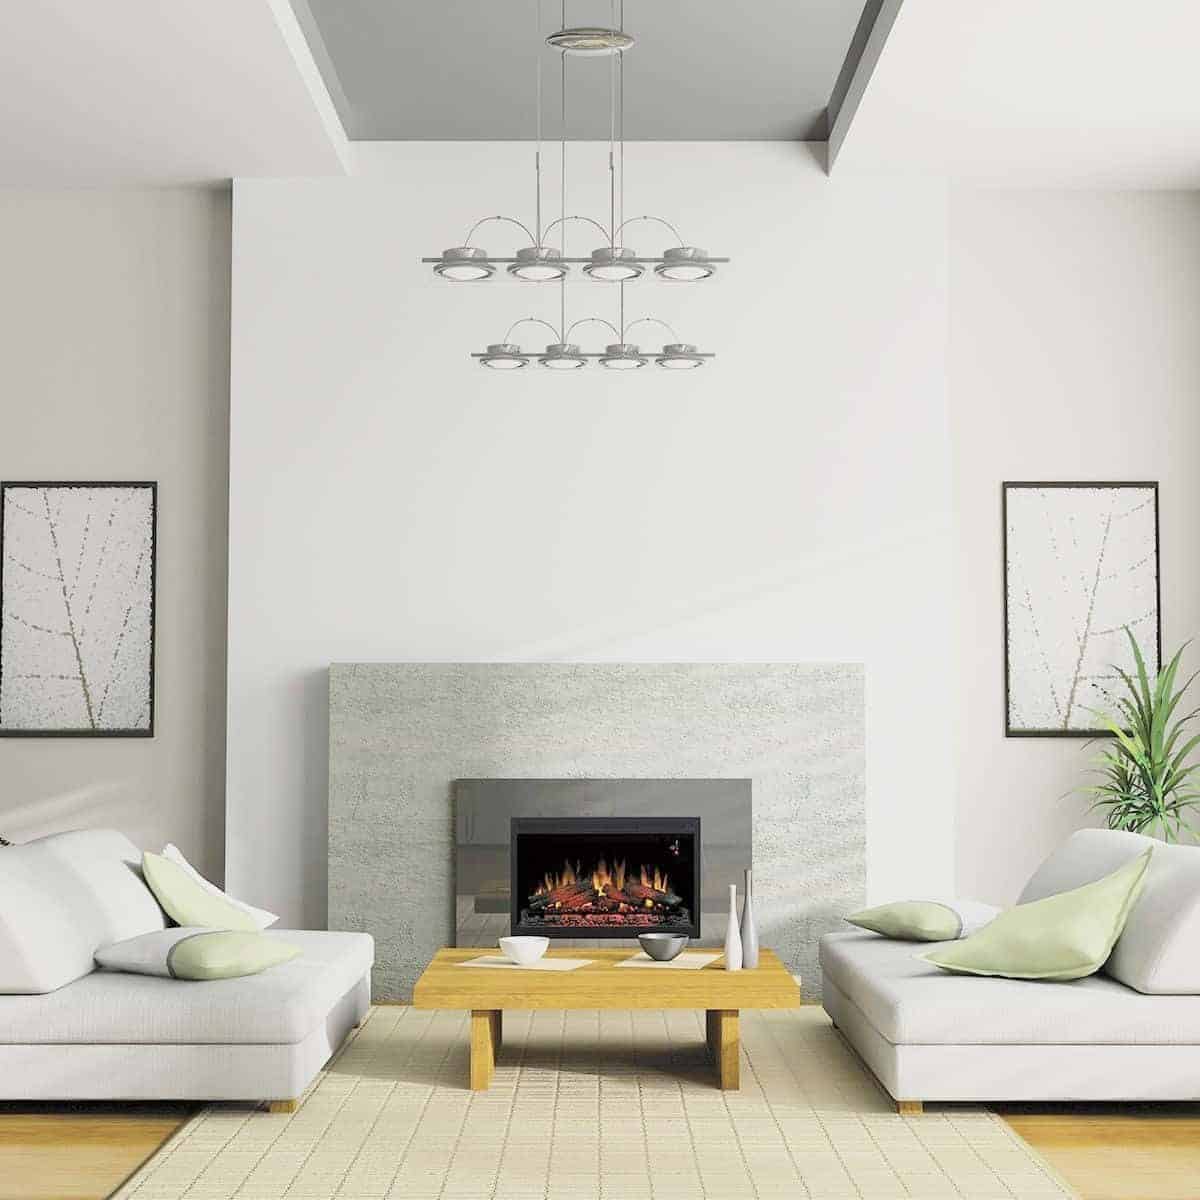 ClassicFlame 36EB110-GRT 36" Traditional Built-in Electric Fireplace Insert